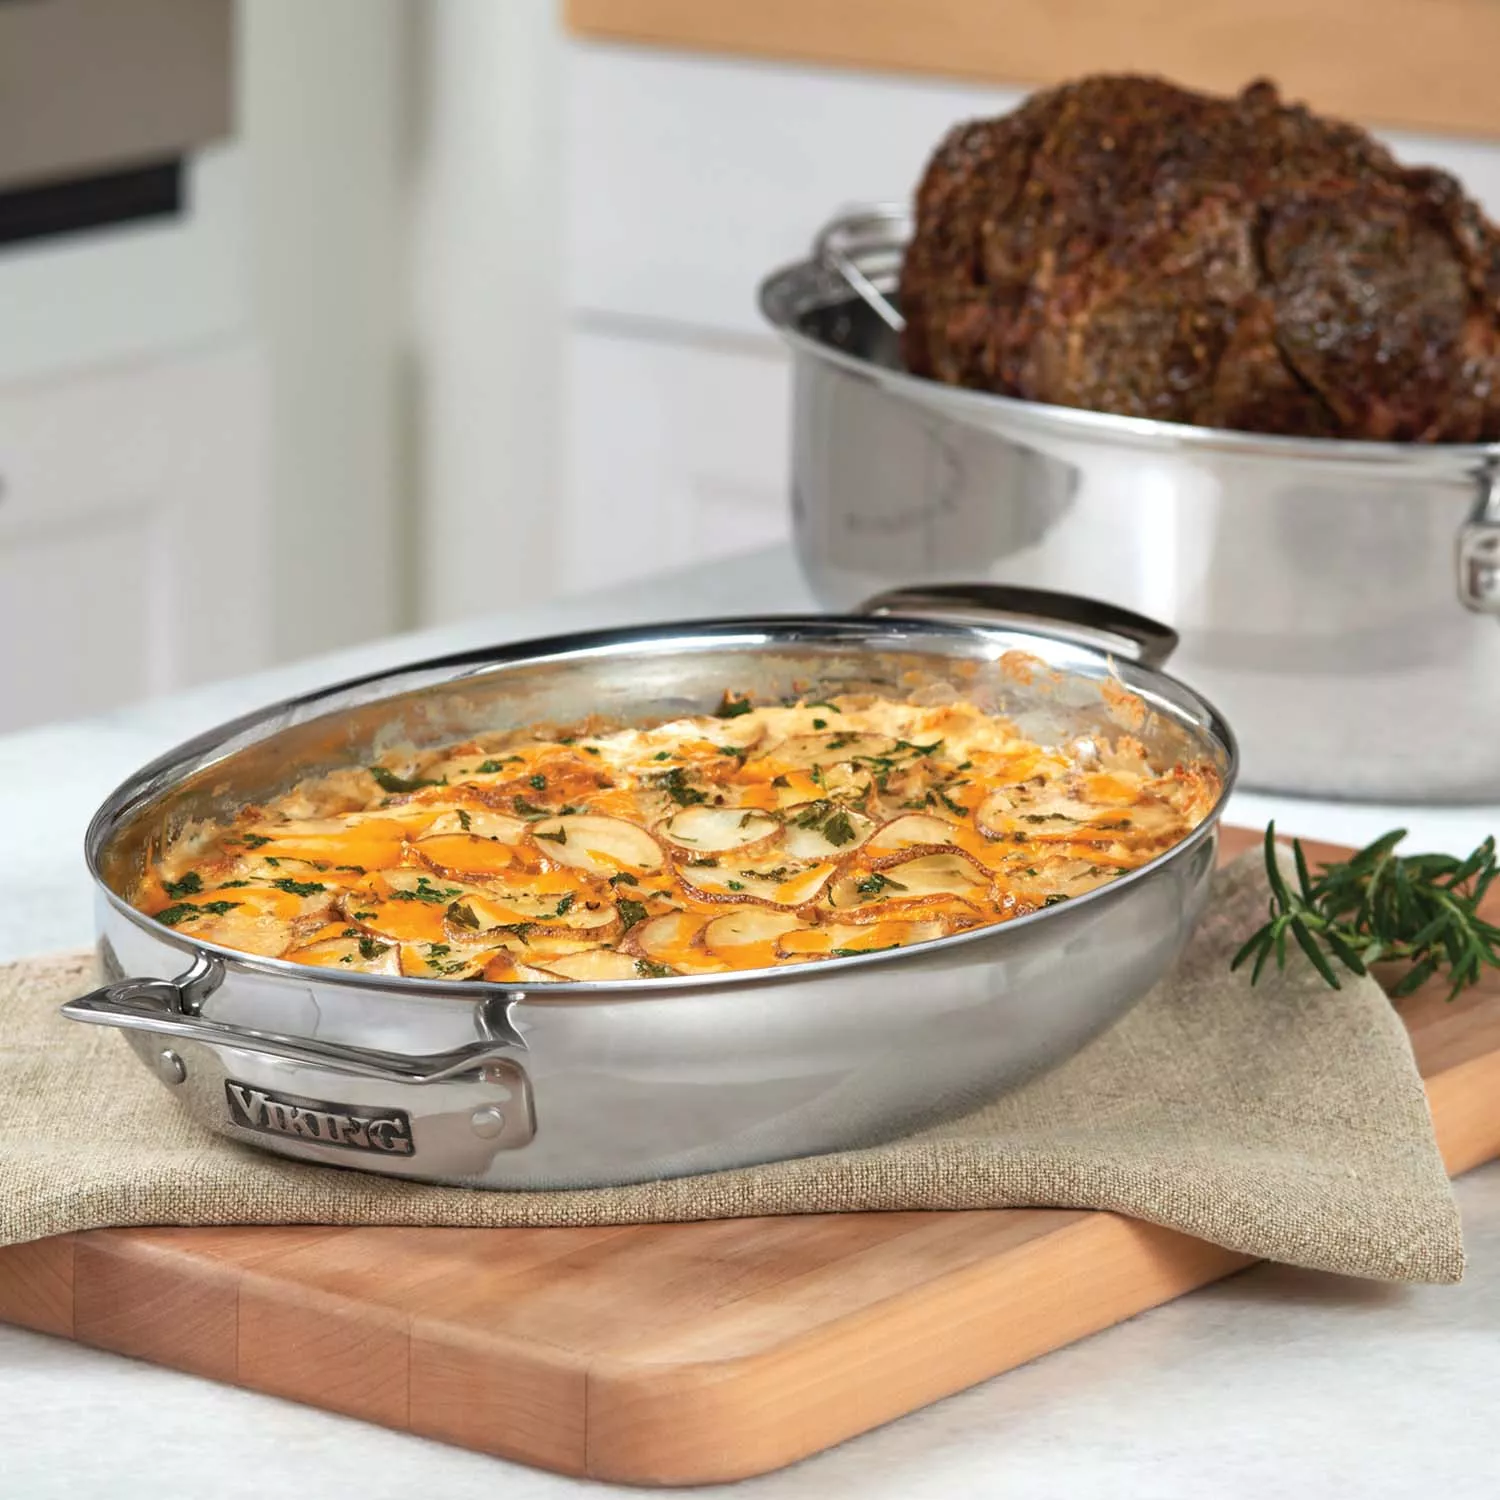 All-Clad Stainless Steel 15 Oval Baker with Pot Holders